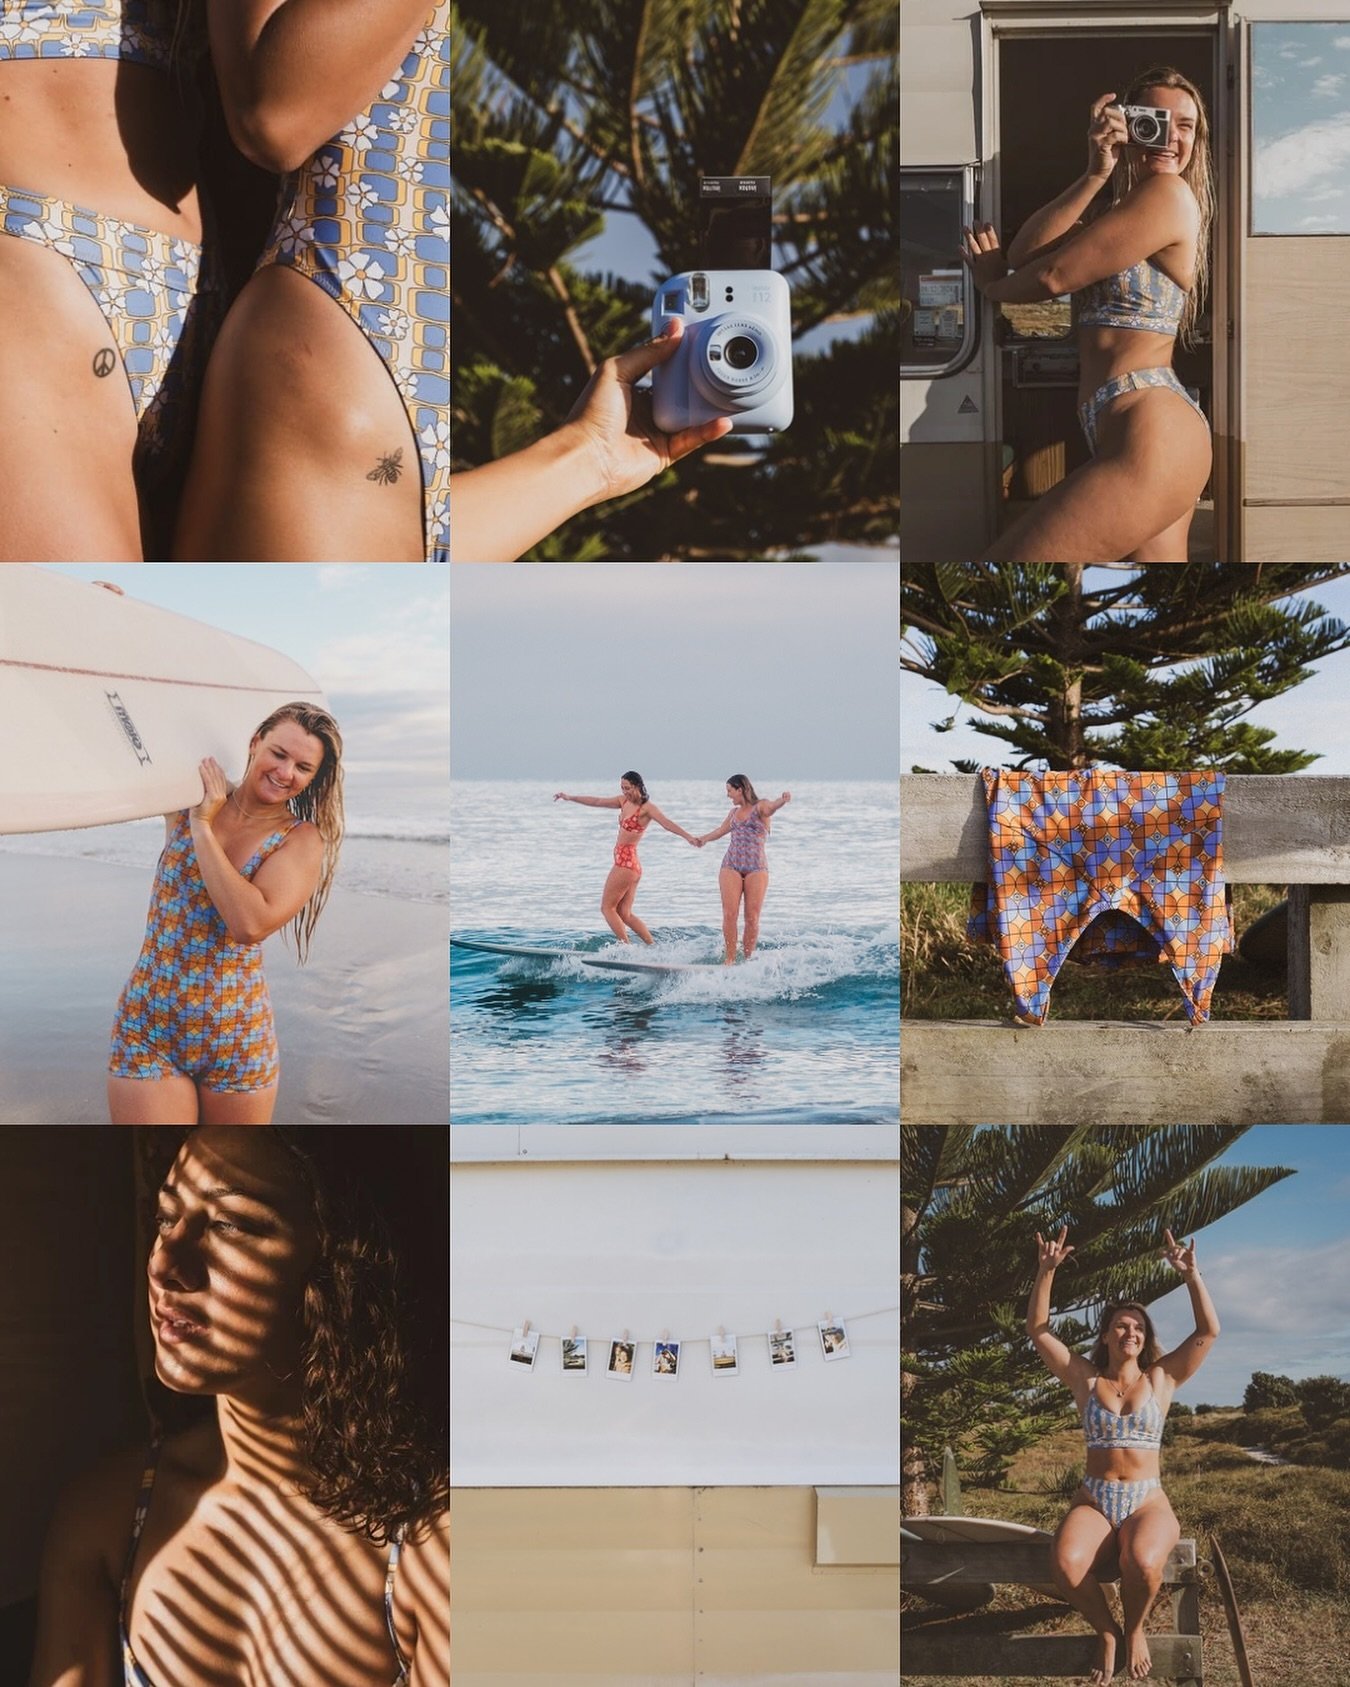 If this is your idea of a grlz trip with your bestie, we are most likely friends, like on a soul level.🌞

Art direction + lead photographer: @louloubphoto
In partnership with @fujifilmxseriesnz
Mods / surfers: @monitaskipworth @annamajorr 
Swimwear: